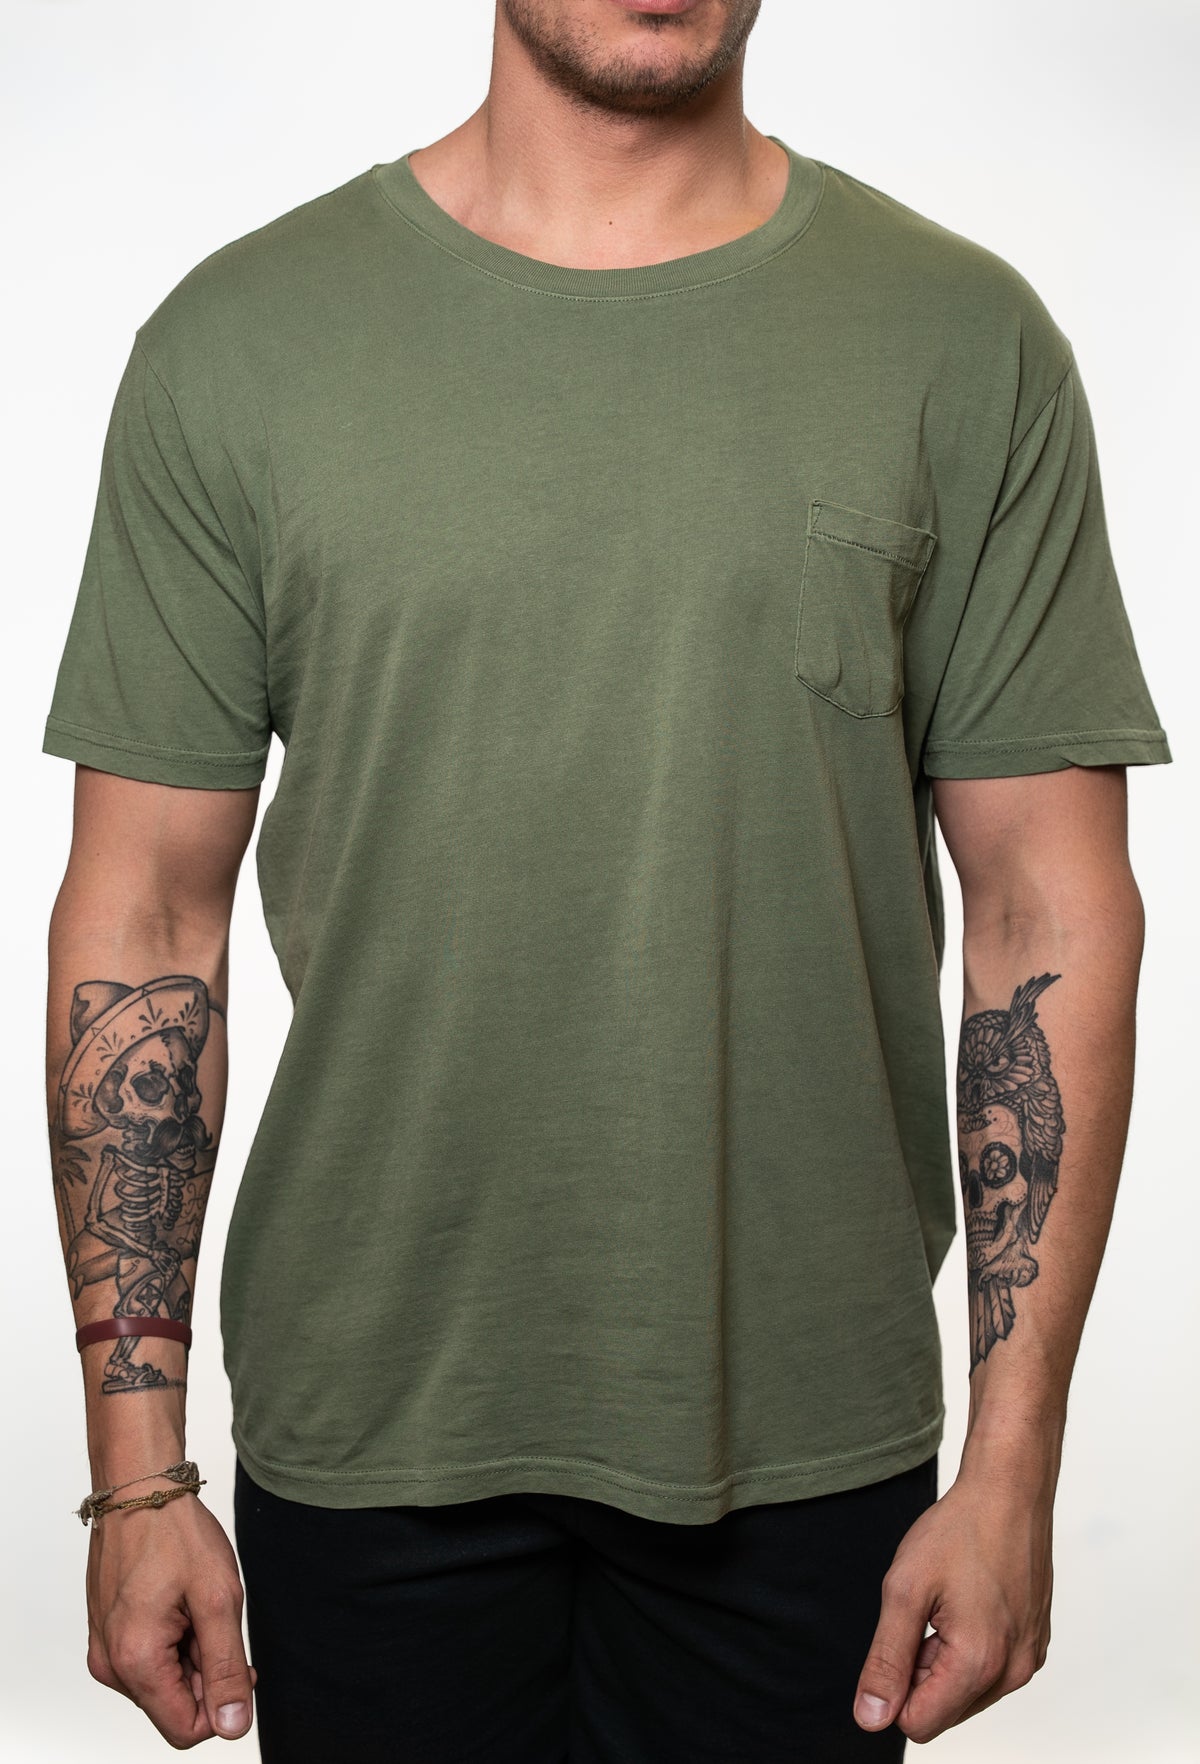 STSSC14 - Pigment Dyed Pocket Tee